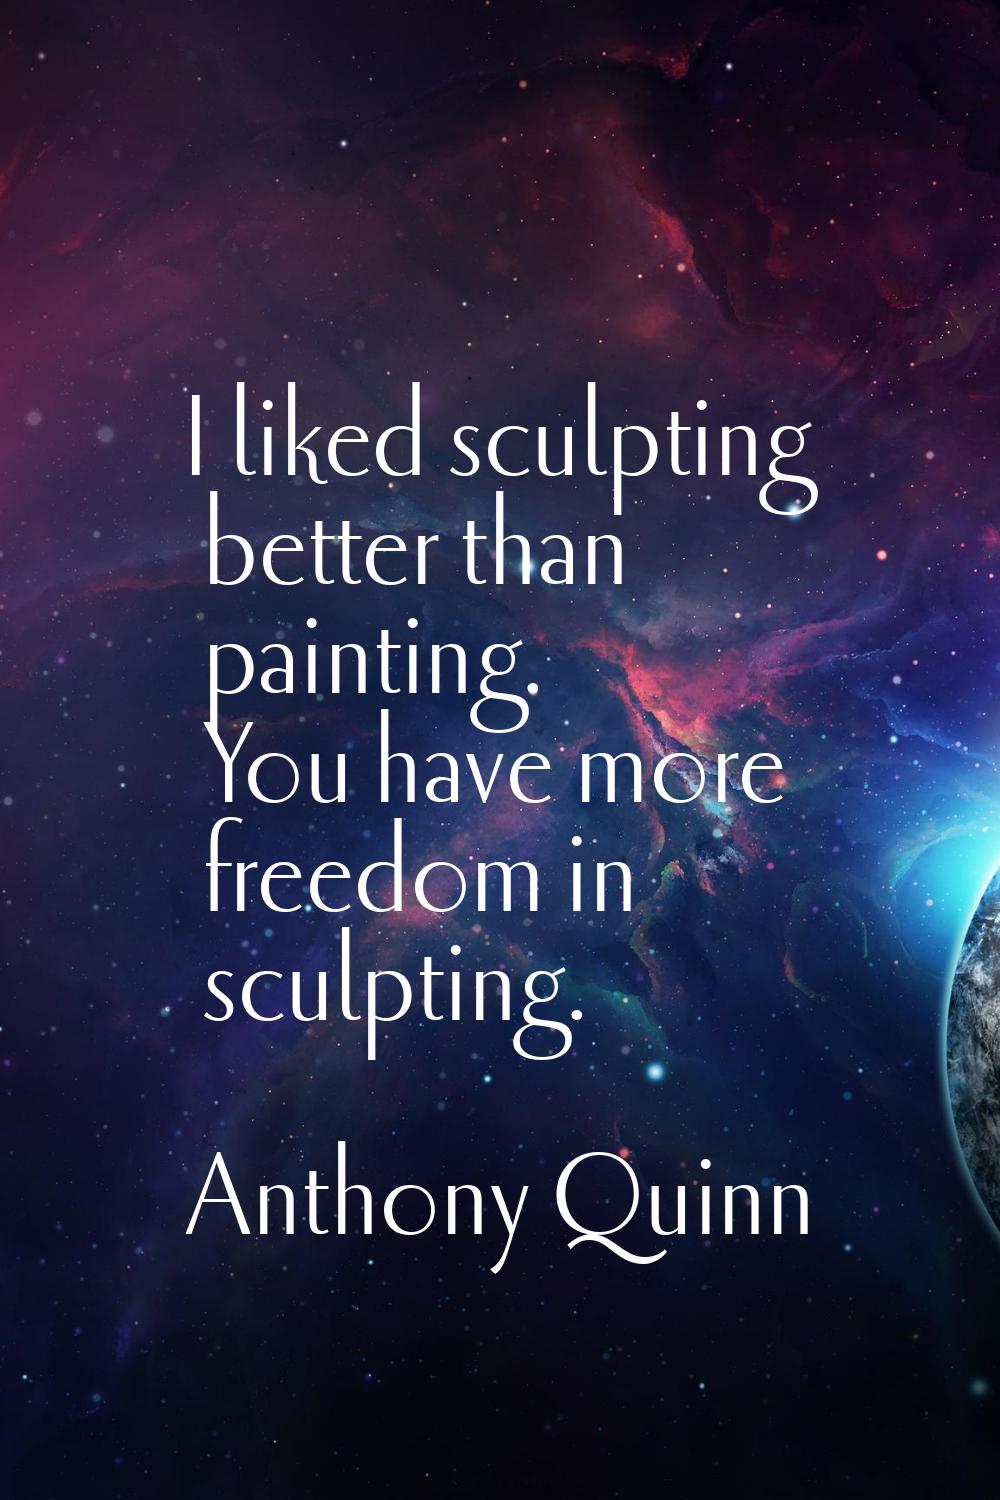 I liked sculpting better than painting. You have more freedom in sculpting.